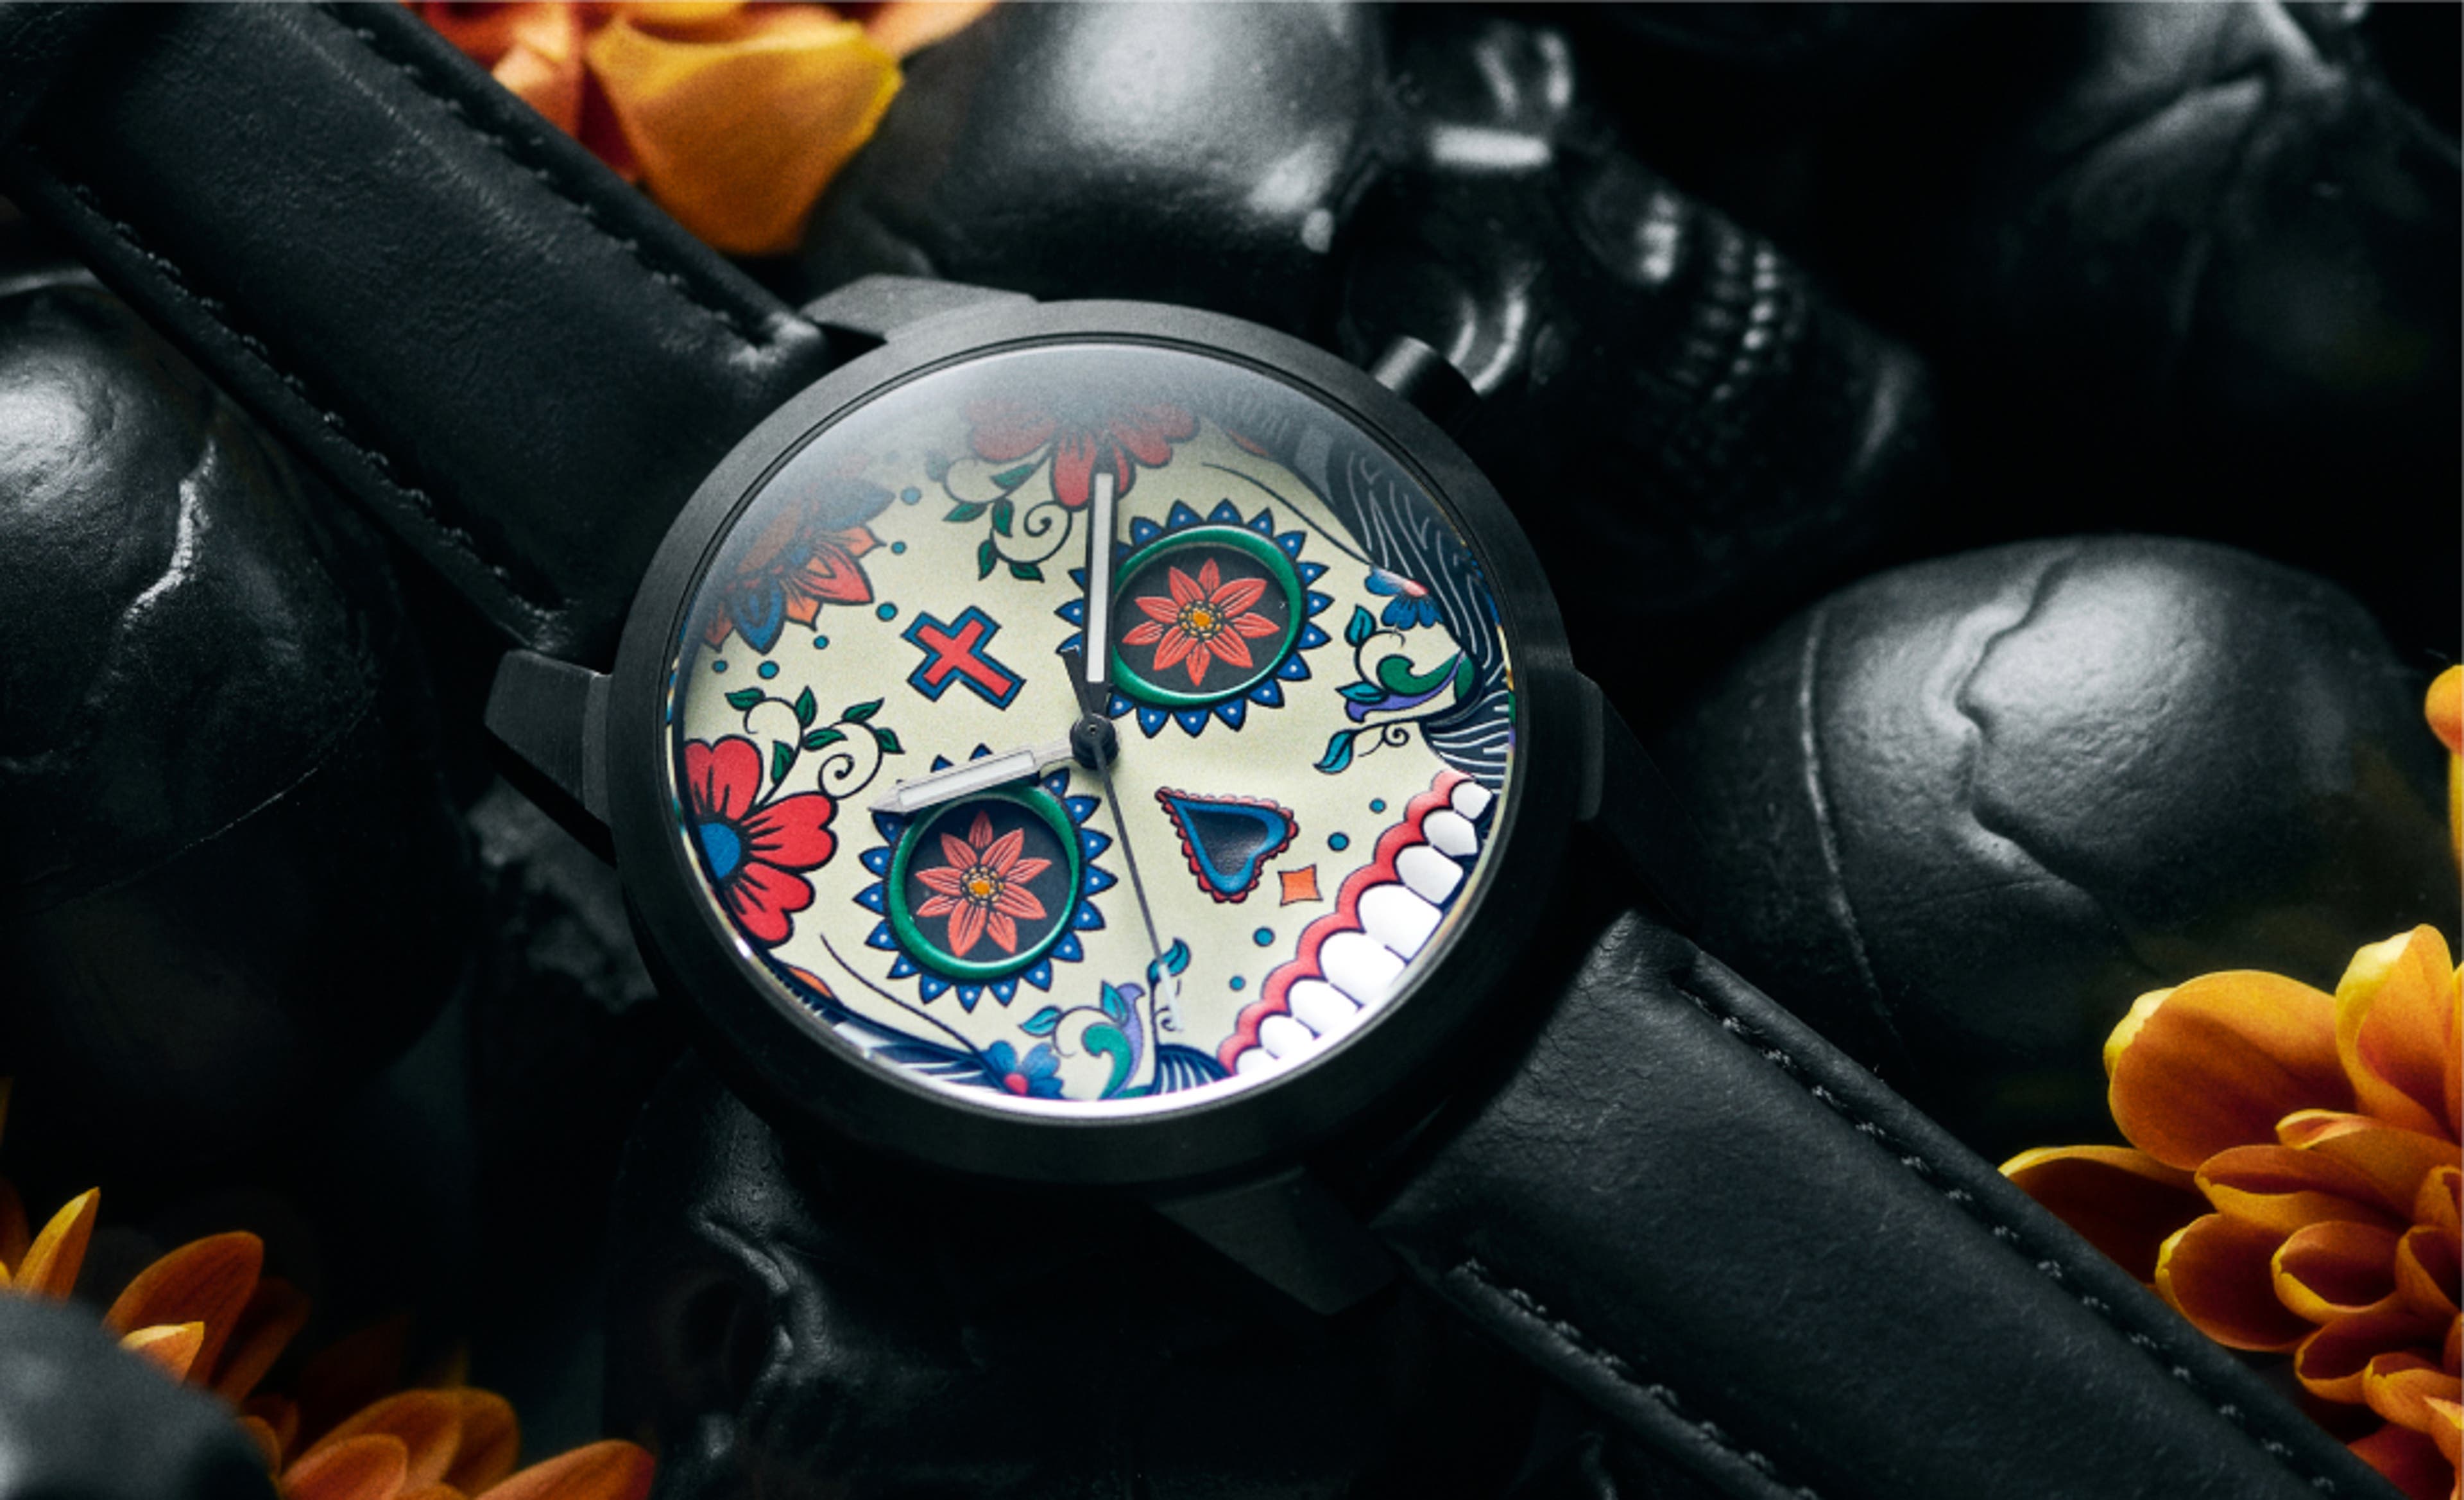 DAY OF THE DEAD WATCHES